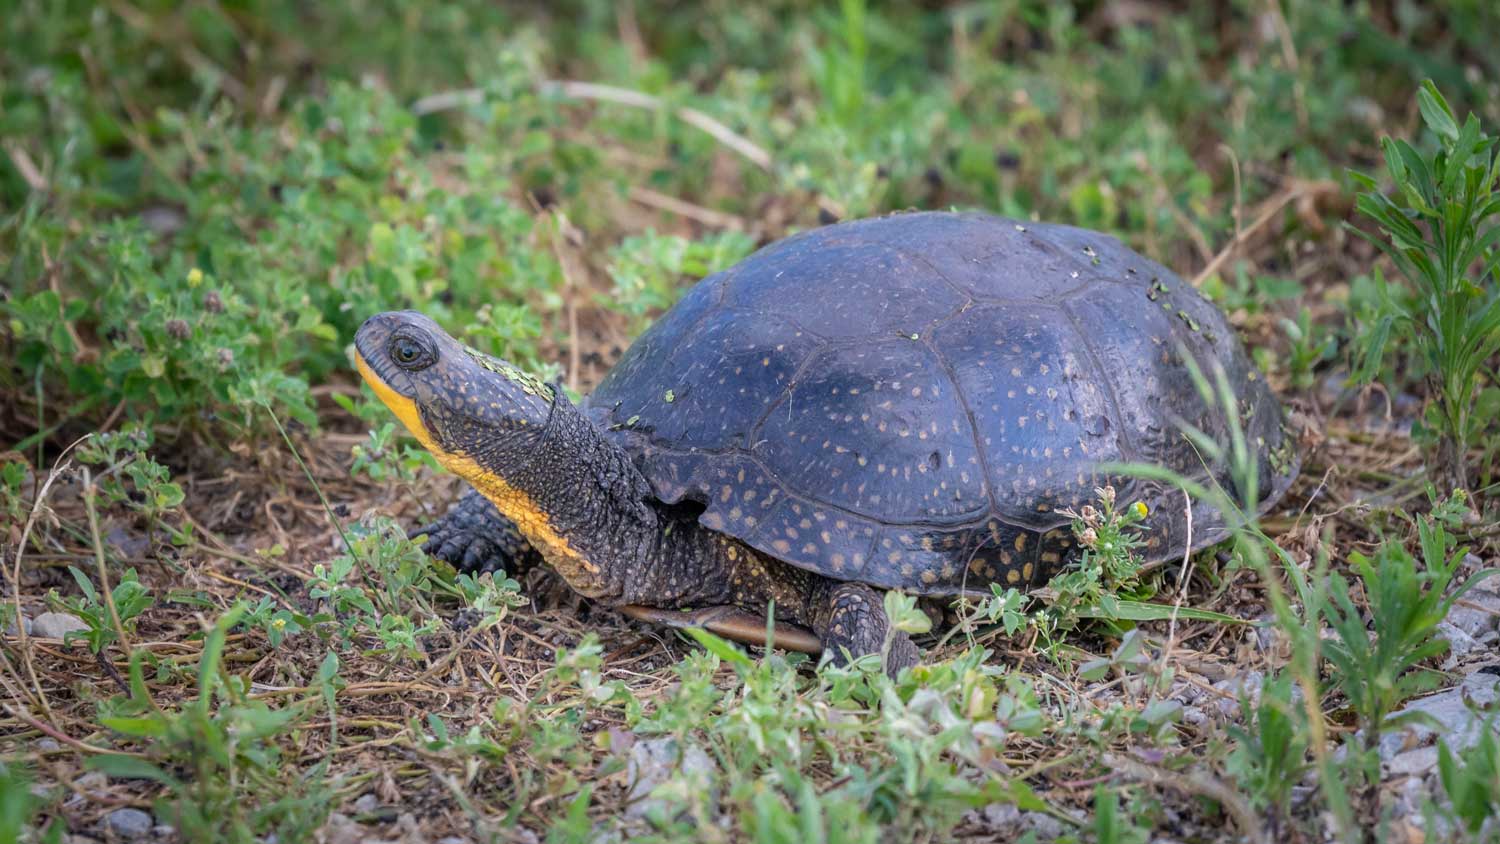 A Blanding's turtle on the ground.